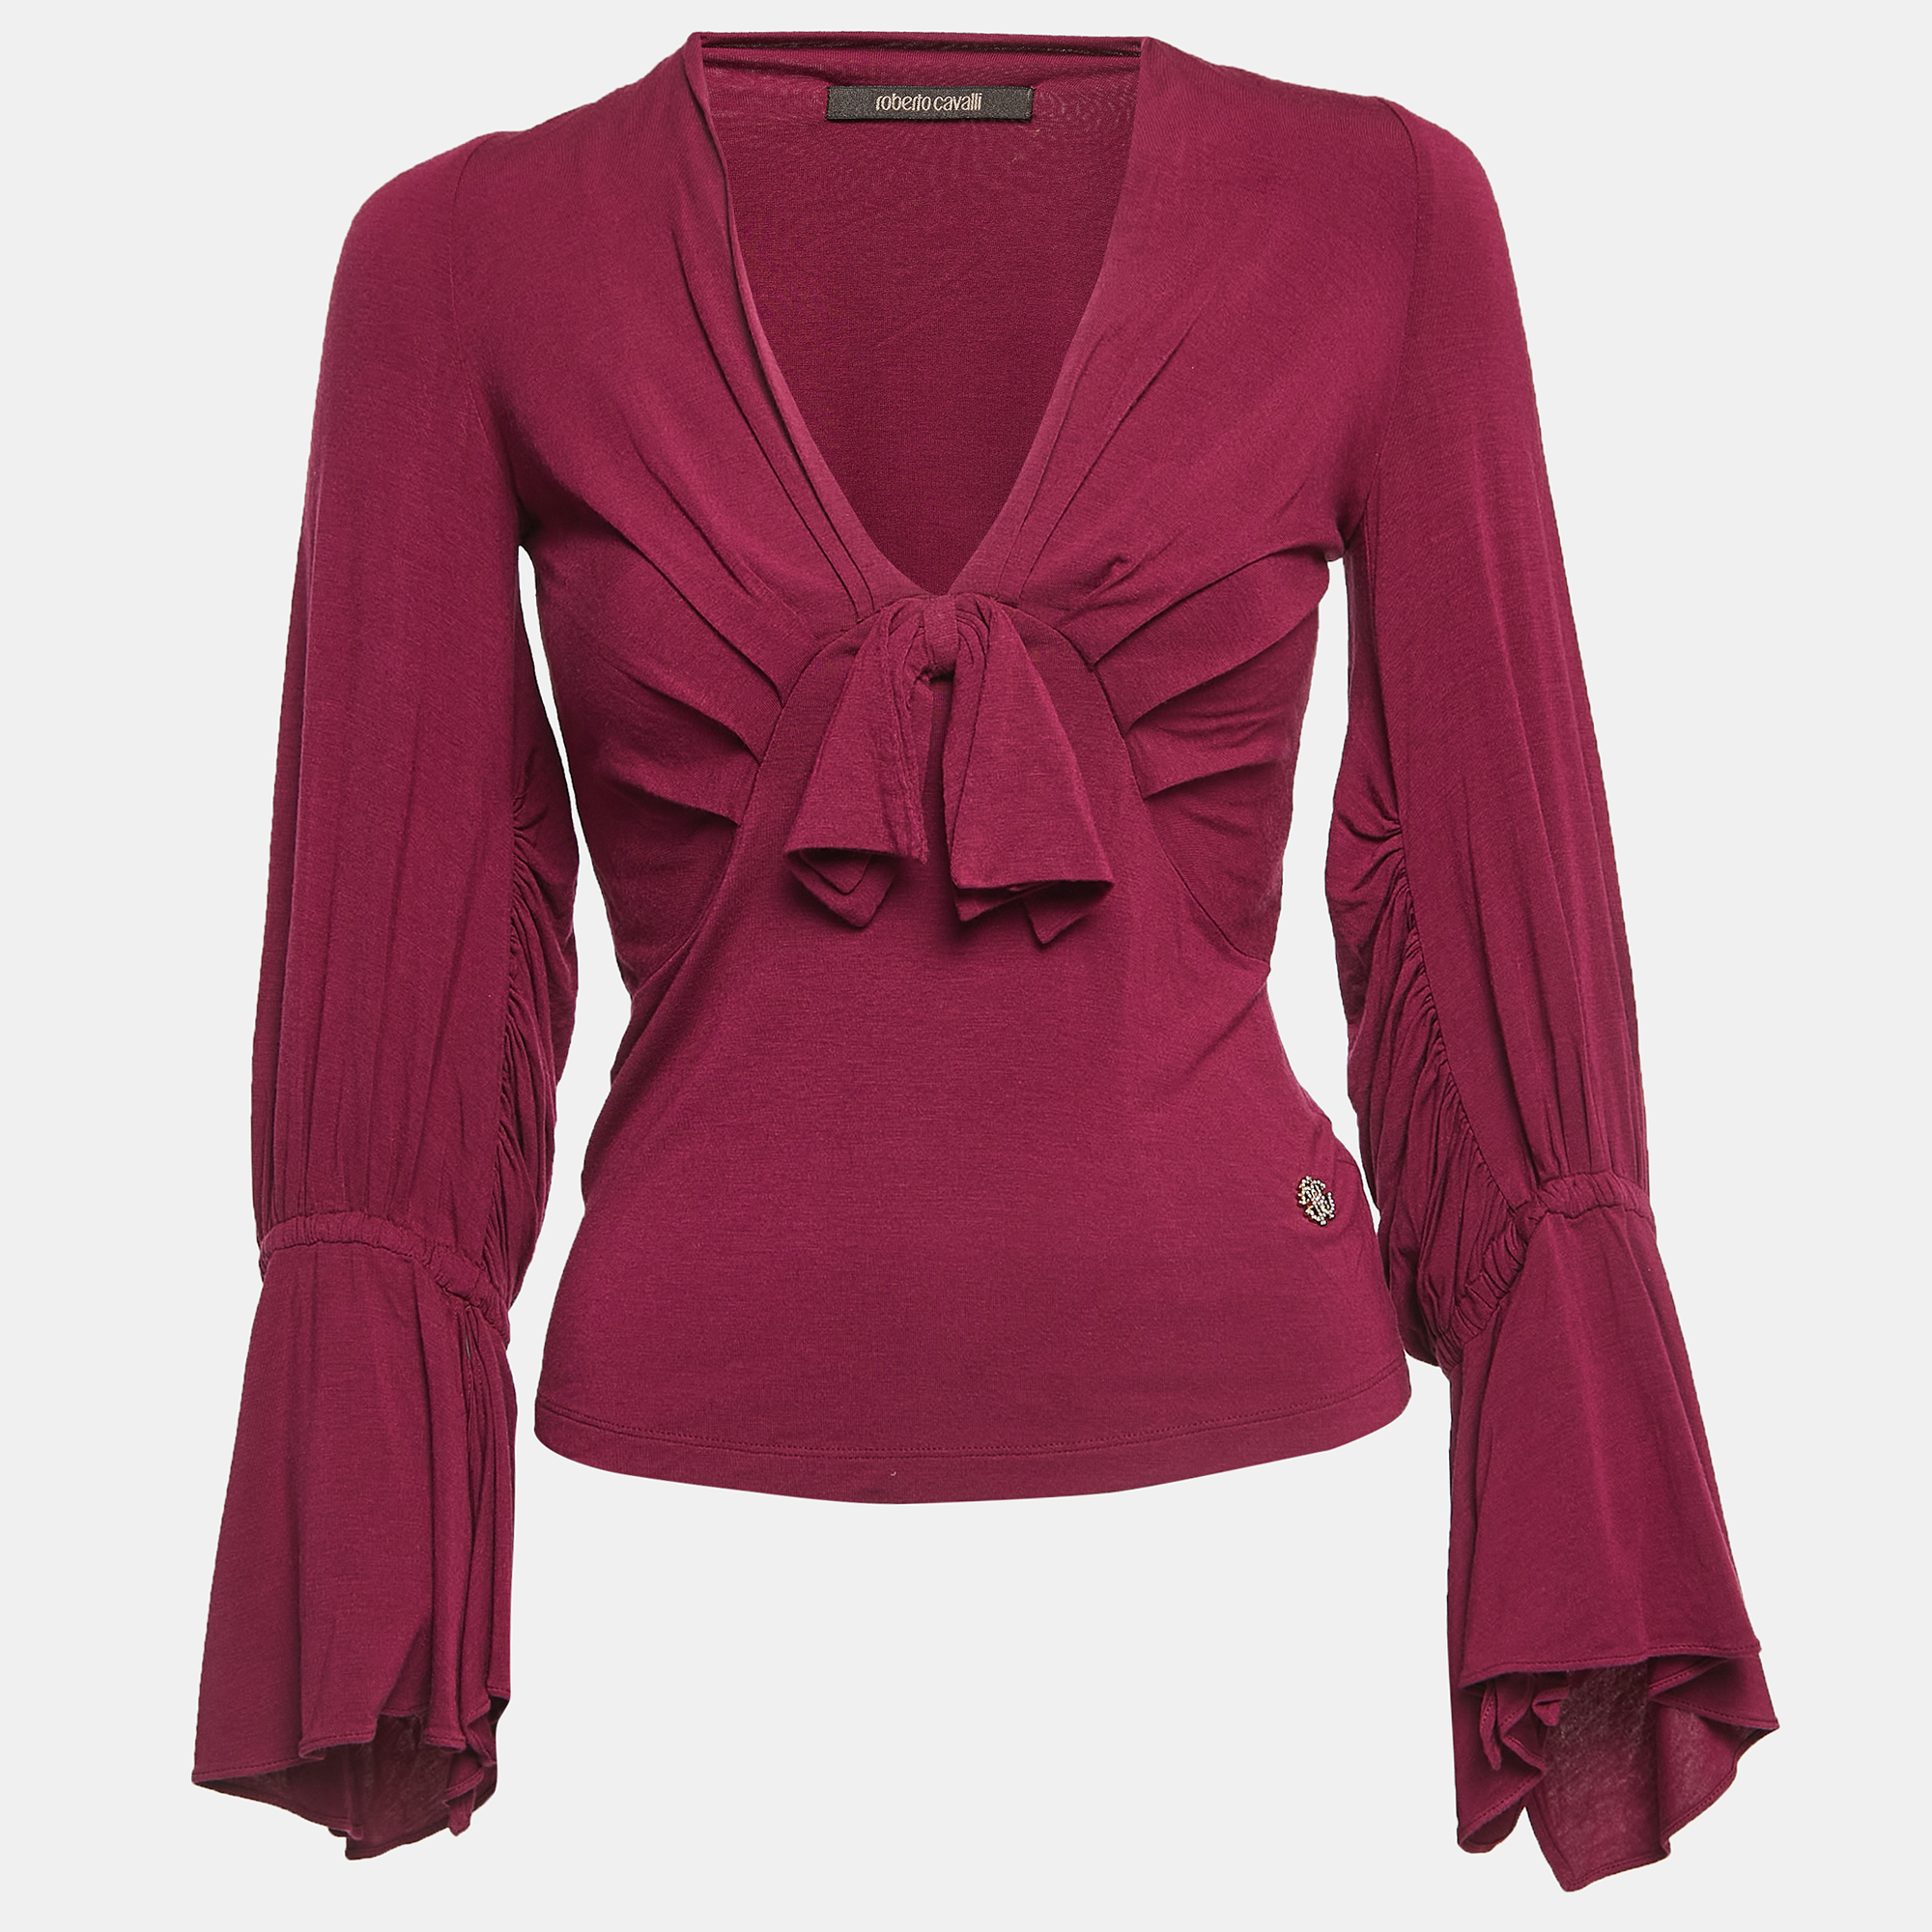 Roberto Cavalli Magenta Pink Knit Bow Detailed Long Sleeve Top S